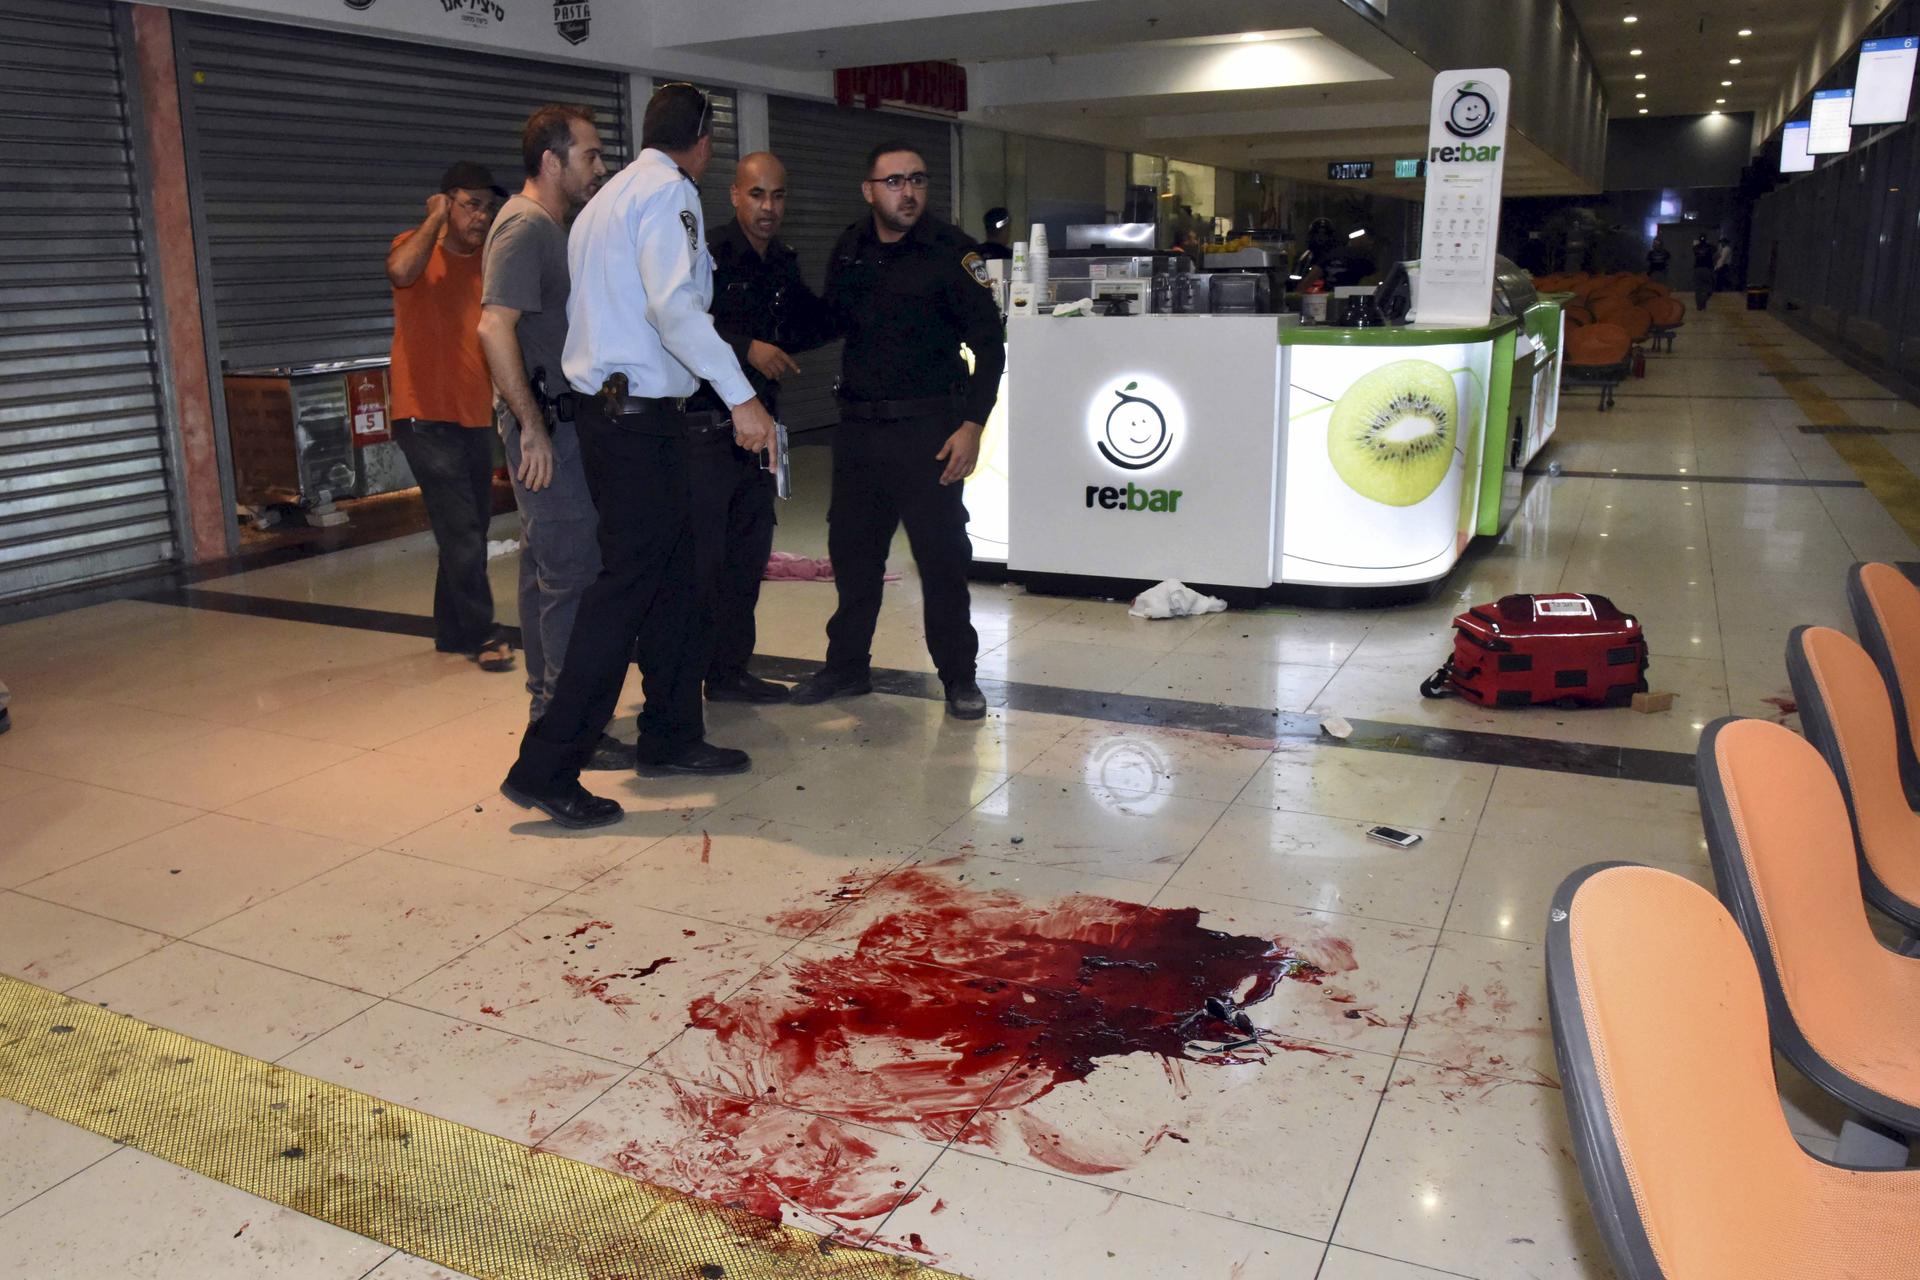 Israeli security personals stand next to blood on the floor, at the Beersheba central bus station where a Palestinian gunman went on a stabbing and shooting rampage, followed by a mob attacking a wrongly accused bystander, October 18, 2015.